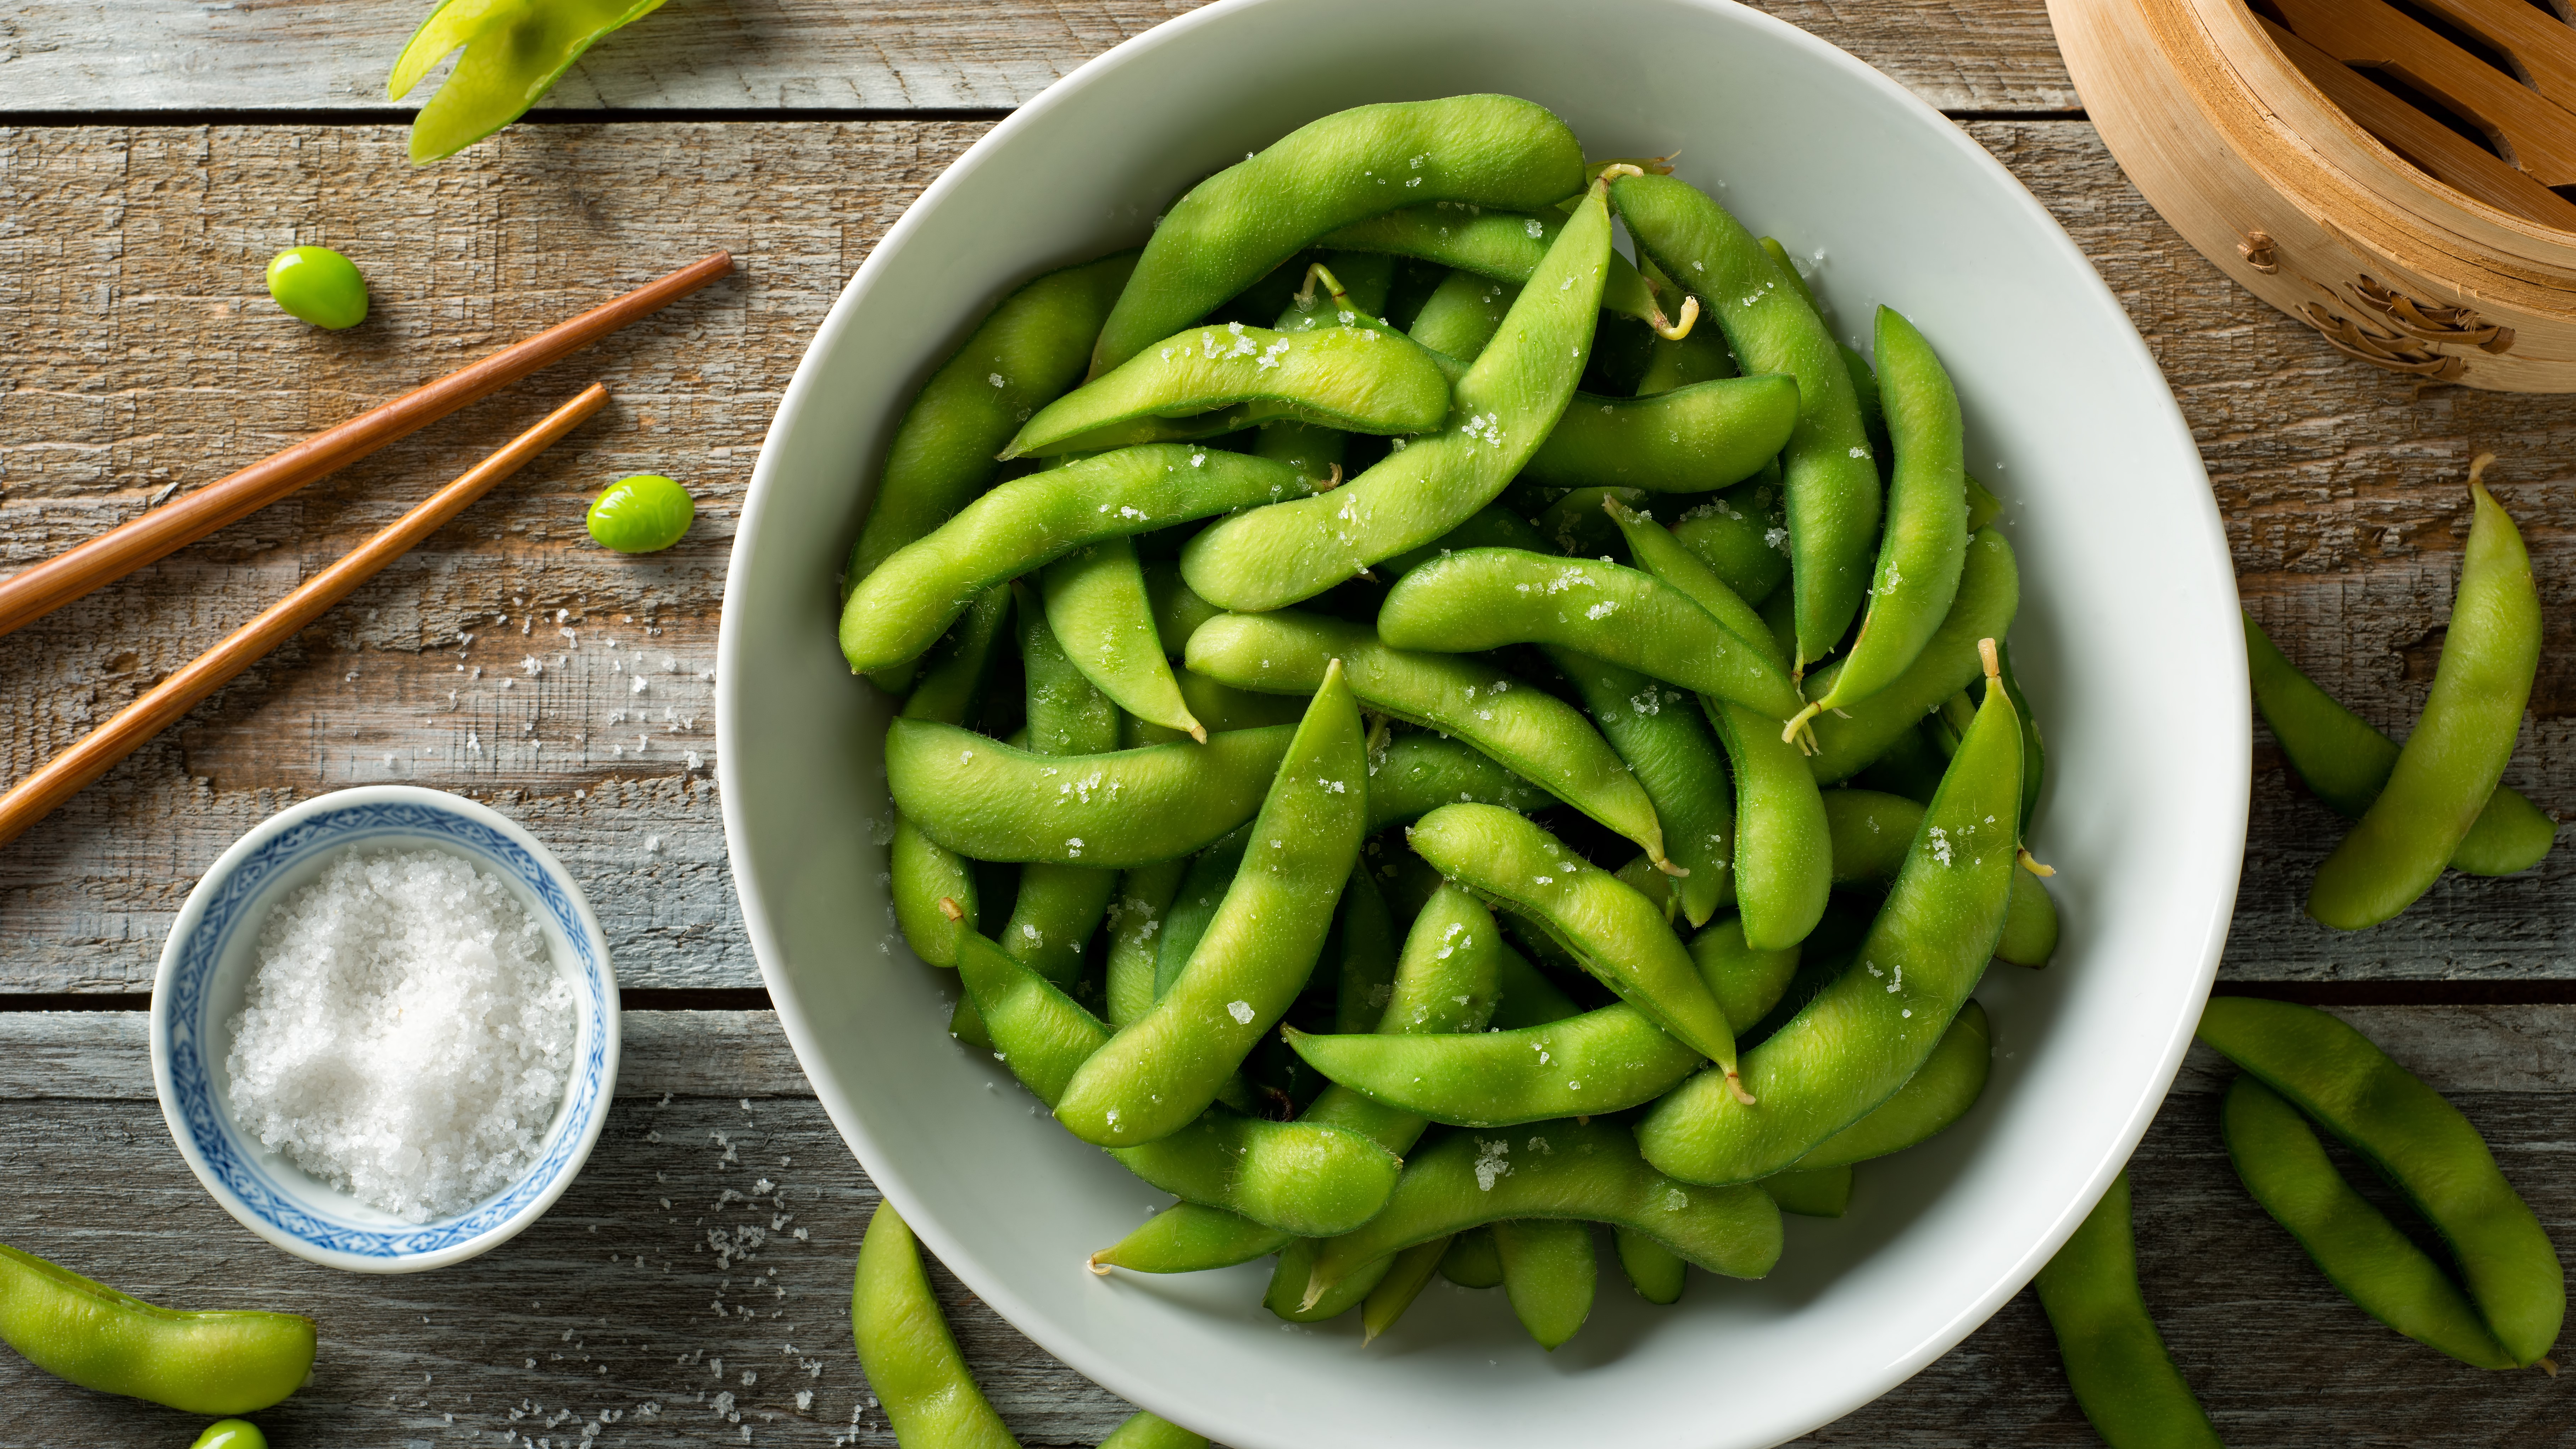 a photo of some edamame beans, a healthy snack